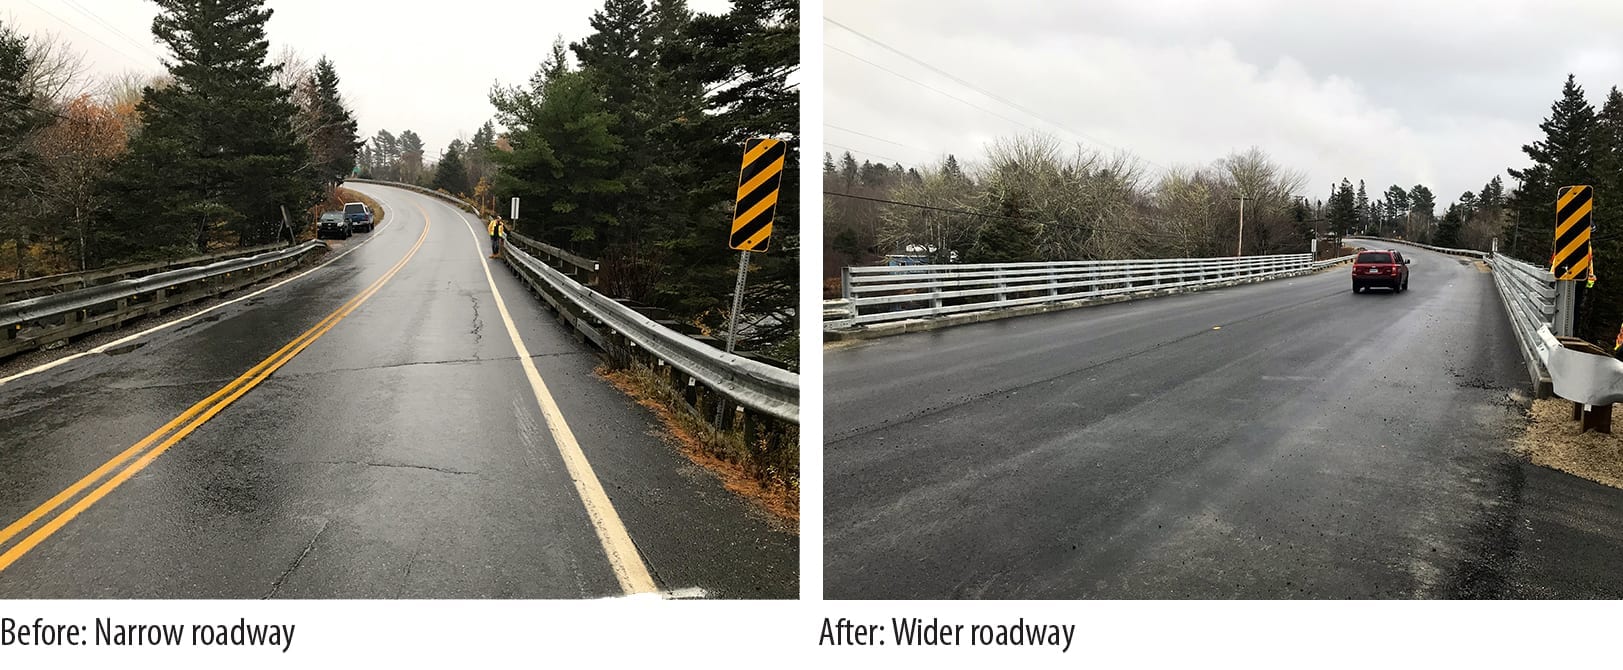 Before and after views of stream crossing road alignments